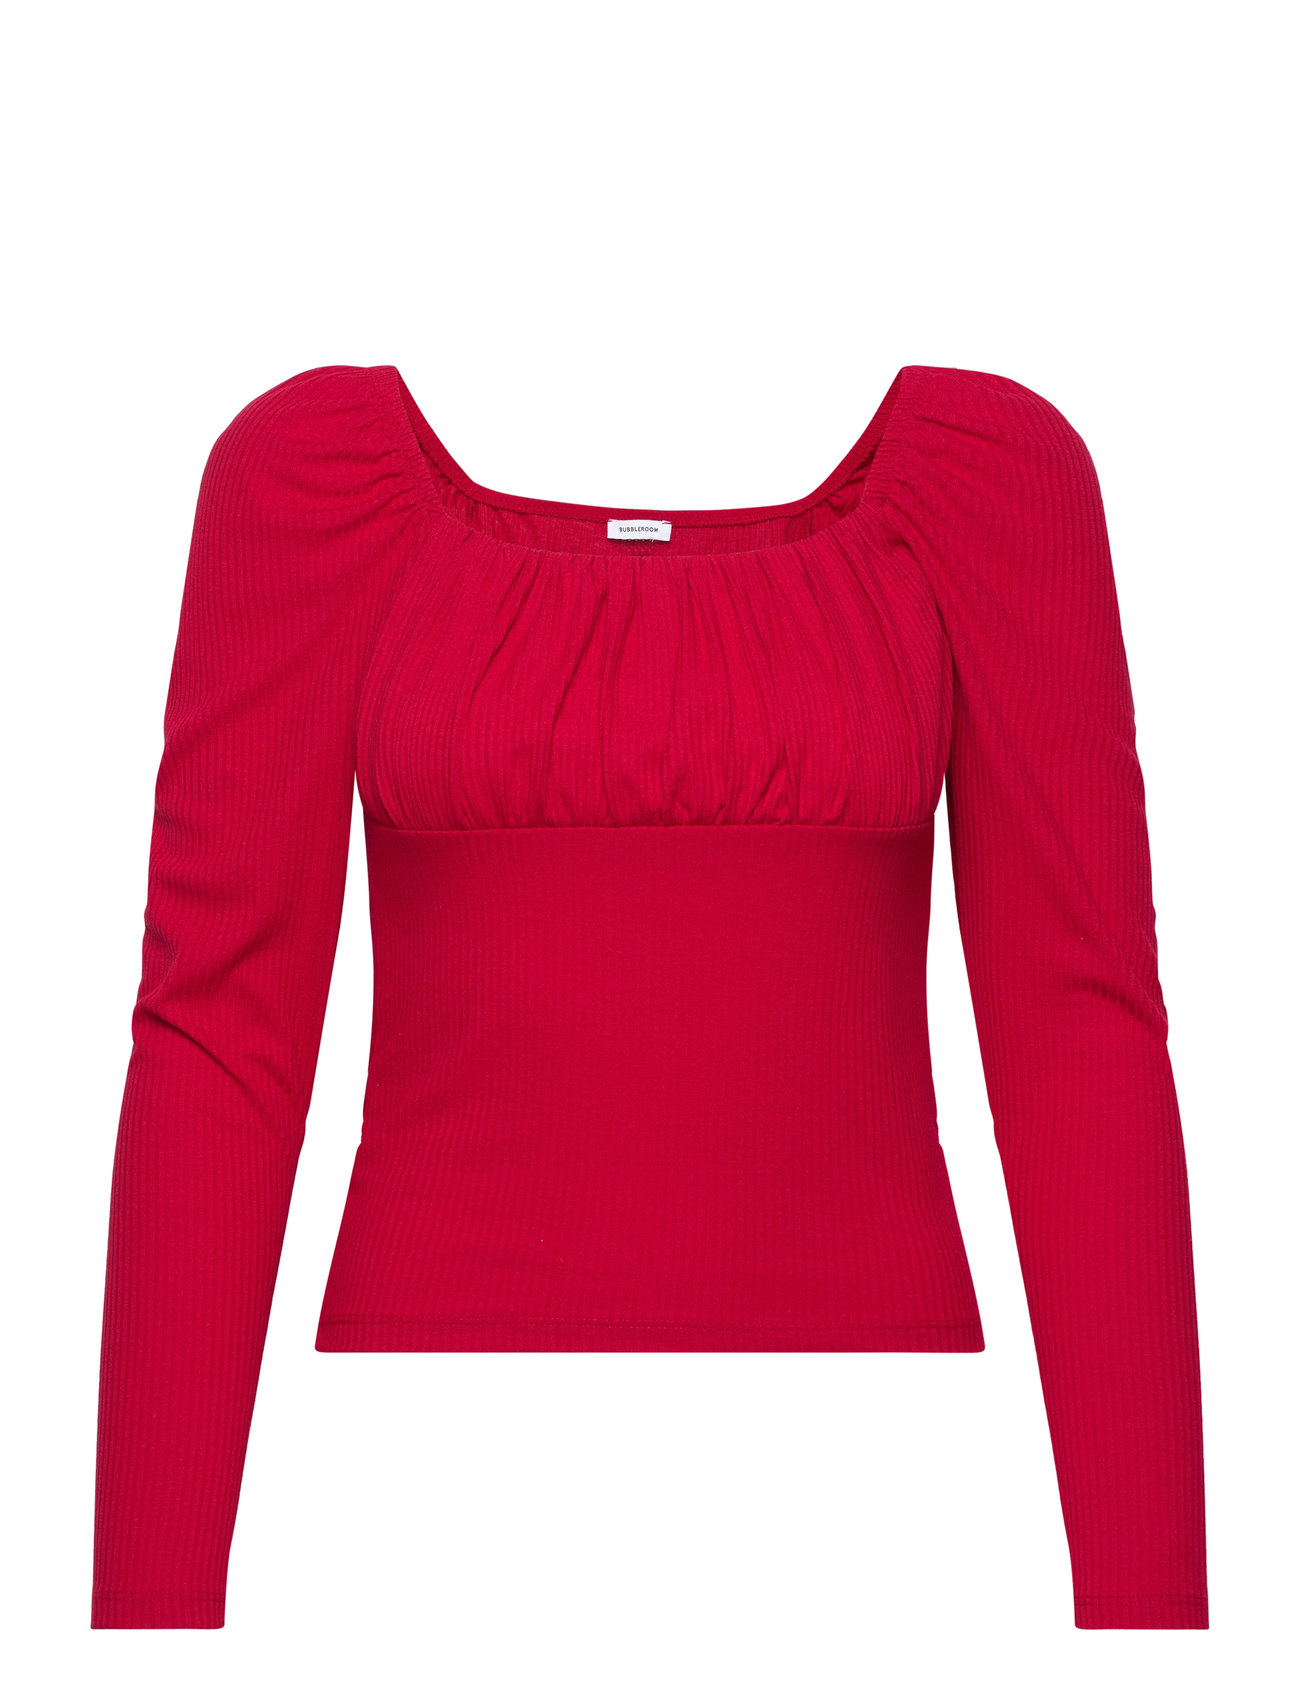 Neija Square Neck Top Tops T-shirts & Tops Long-sleeved Red Bubbleroom